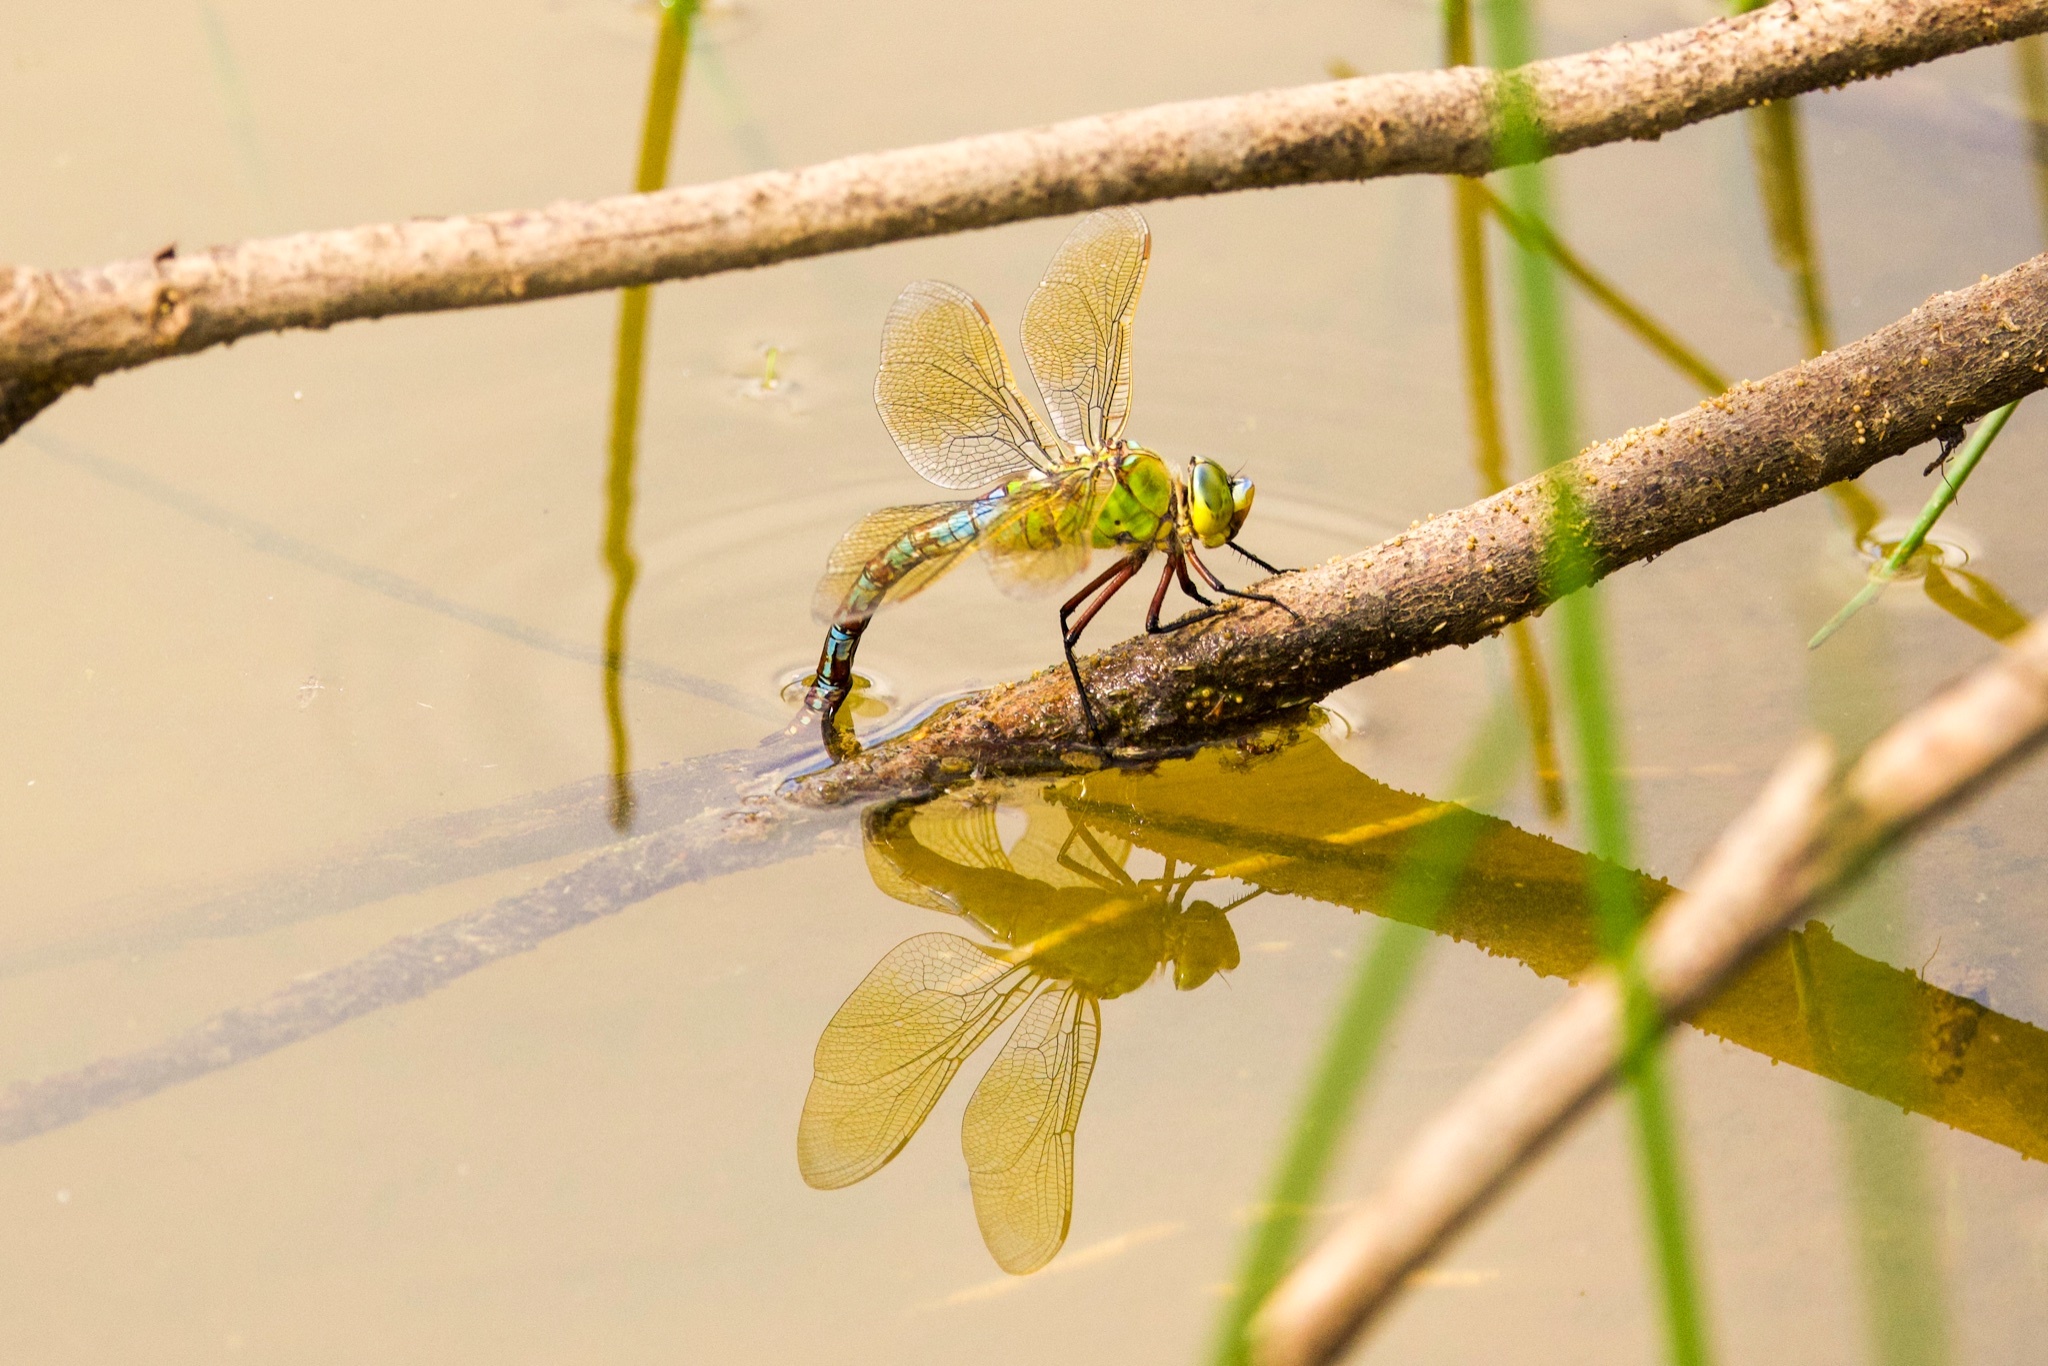 Emperor Dragonfly laying eggs by Heather Wilde